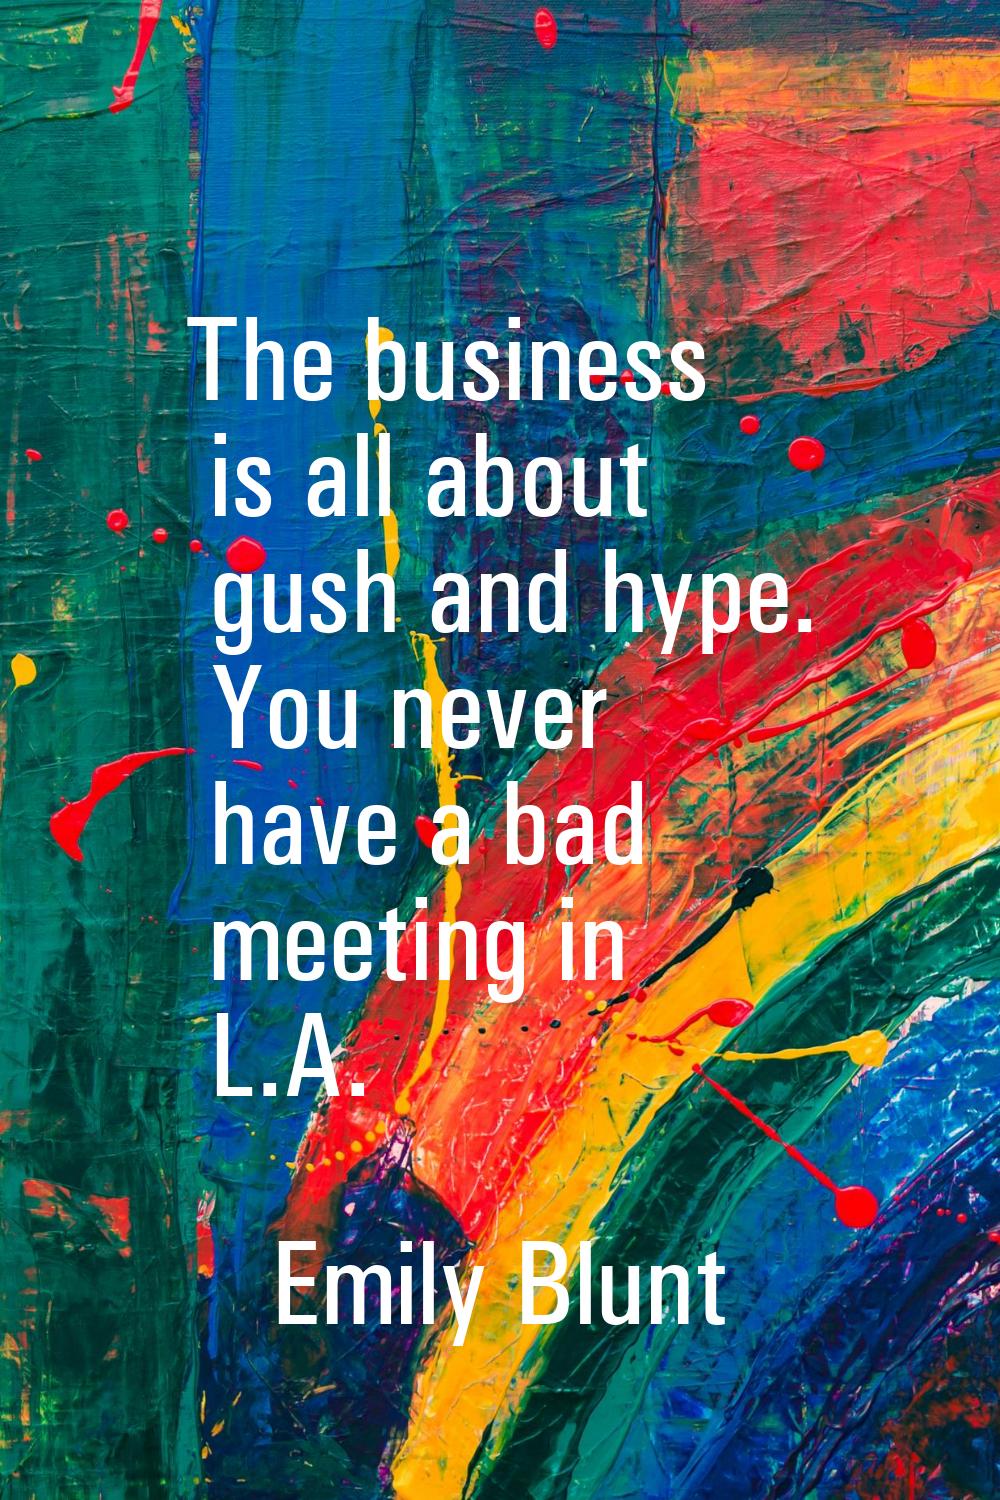 The business is all about gush and hype. You never have a bad meeting in L.A.